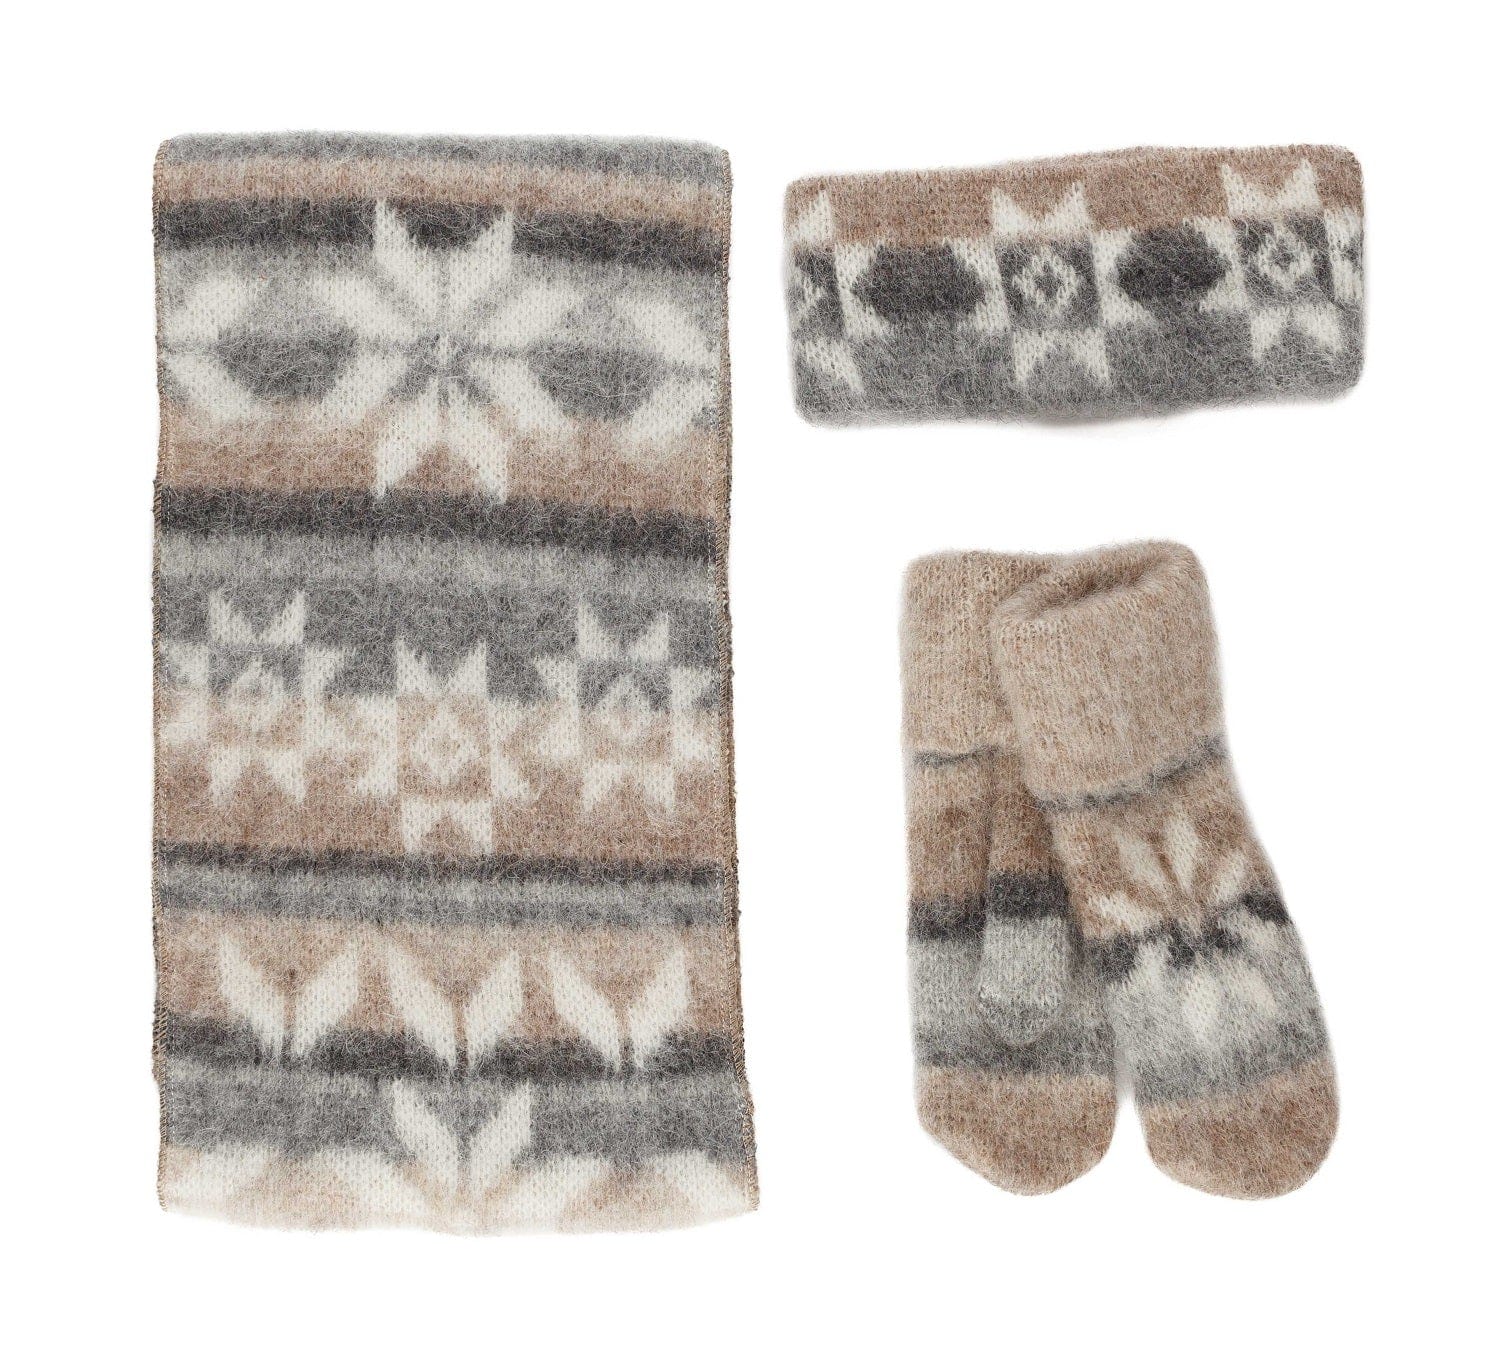 Brushed wool headband, scarf and mittens with 8 Petalled Rose pattern - The Icelandic Store